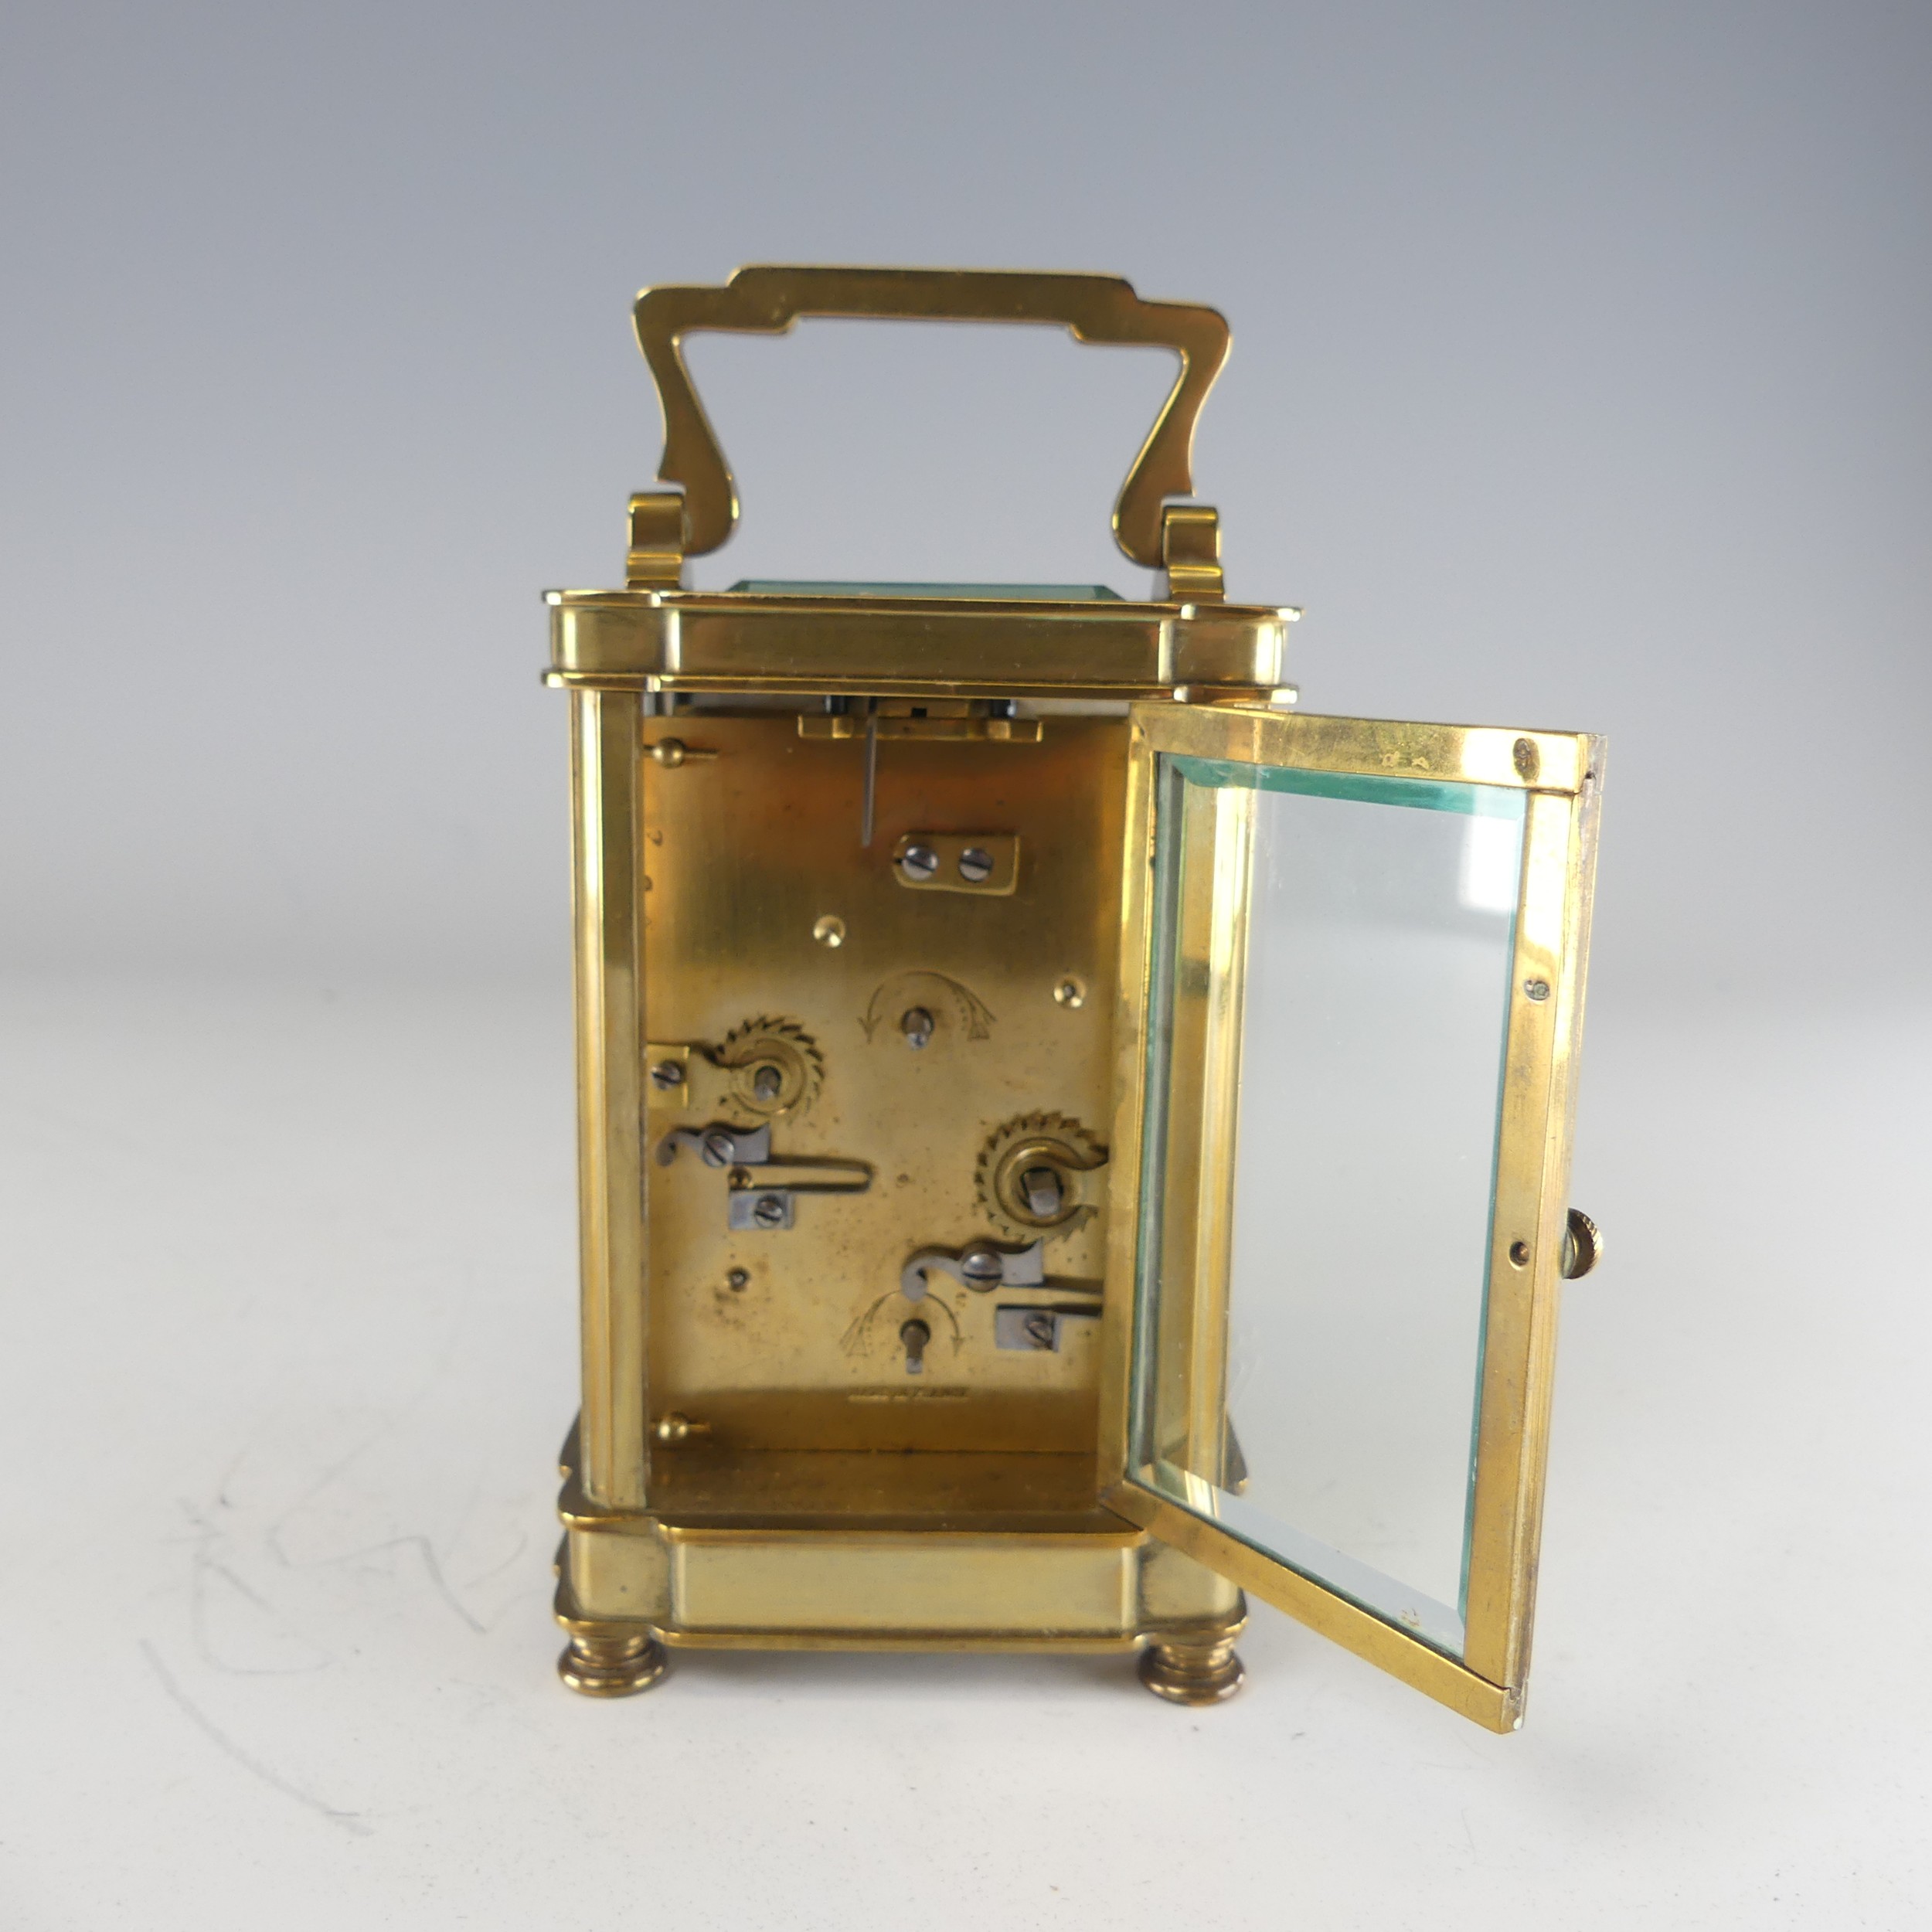 A 20th century French alarm carriage Clock, enamelled white dial with Roman numerals and - Image 7 of 9